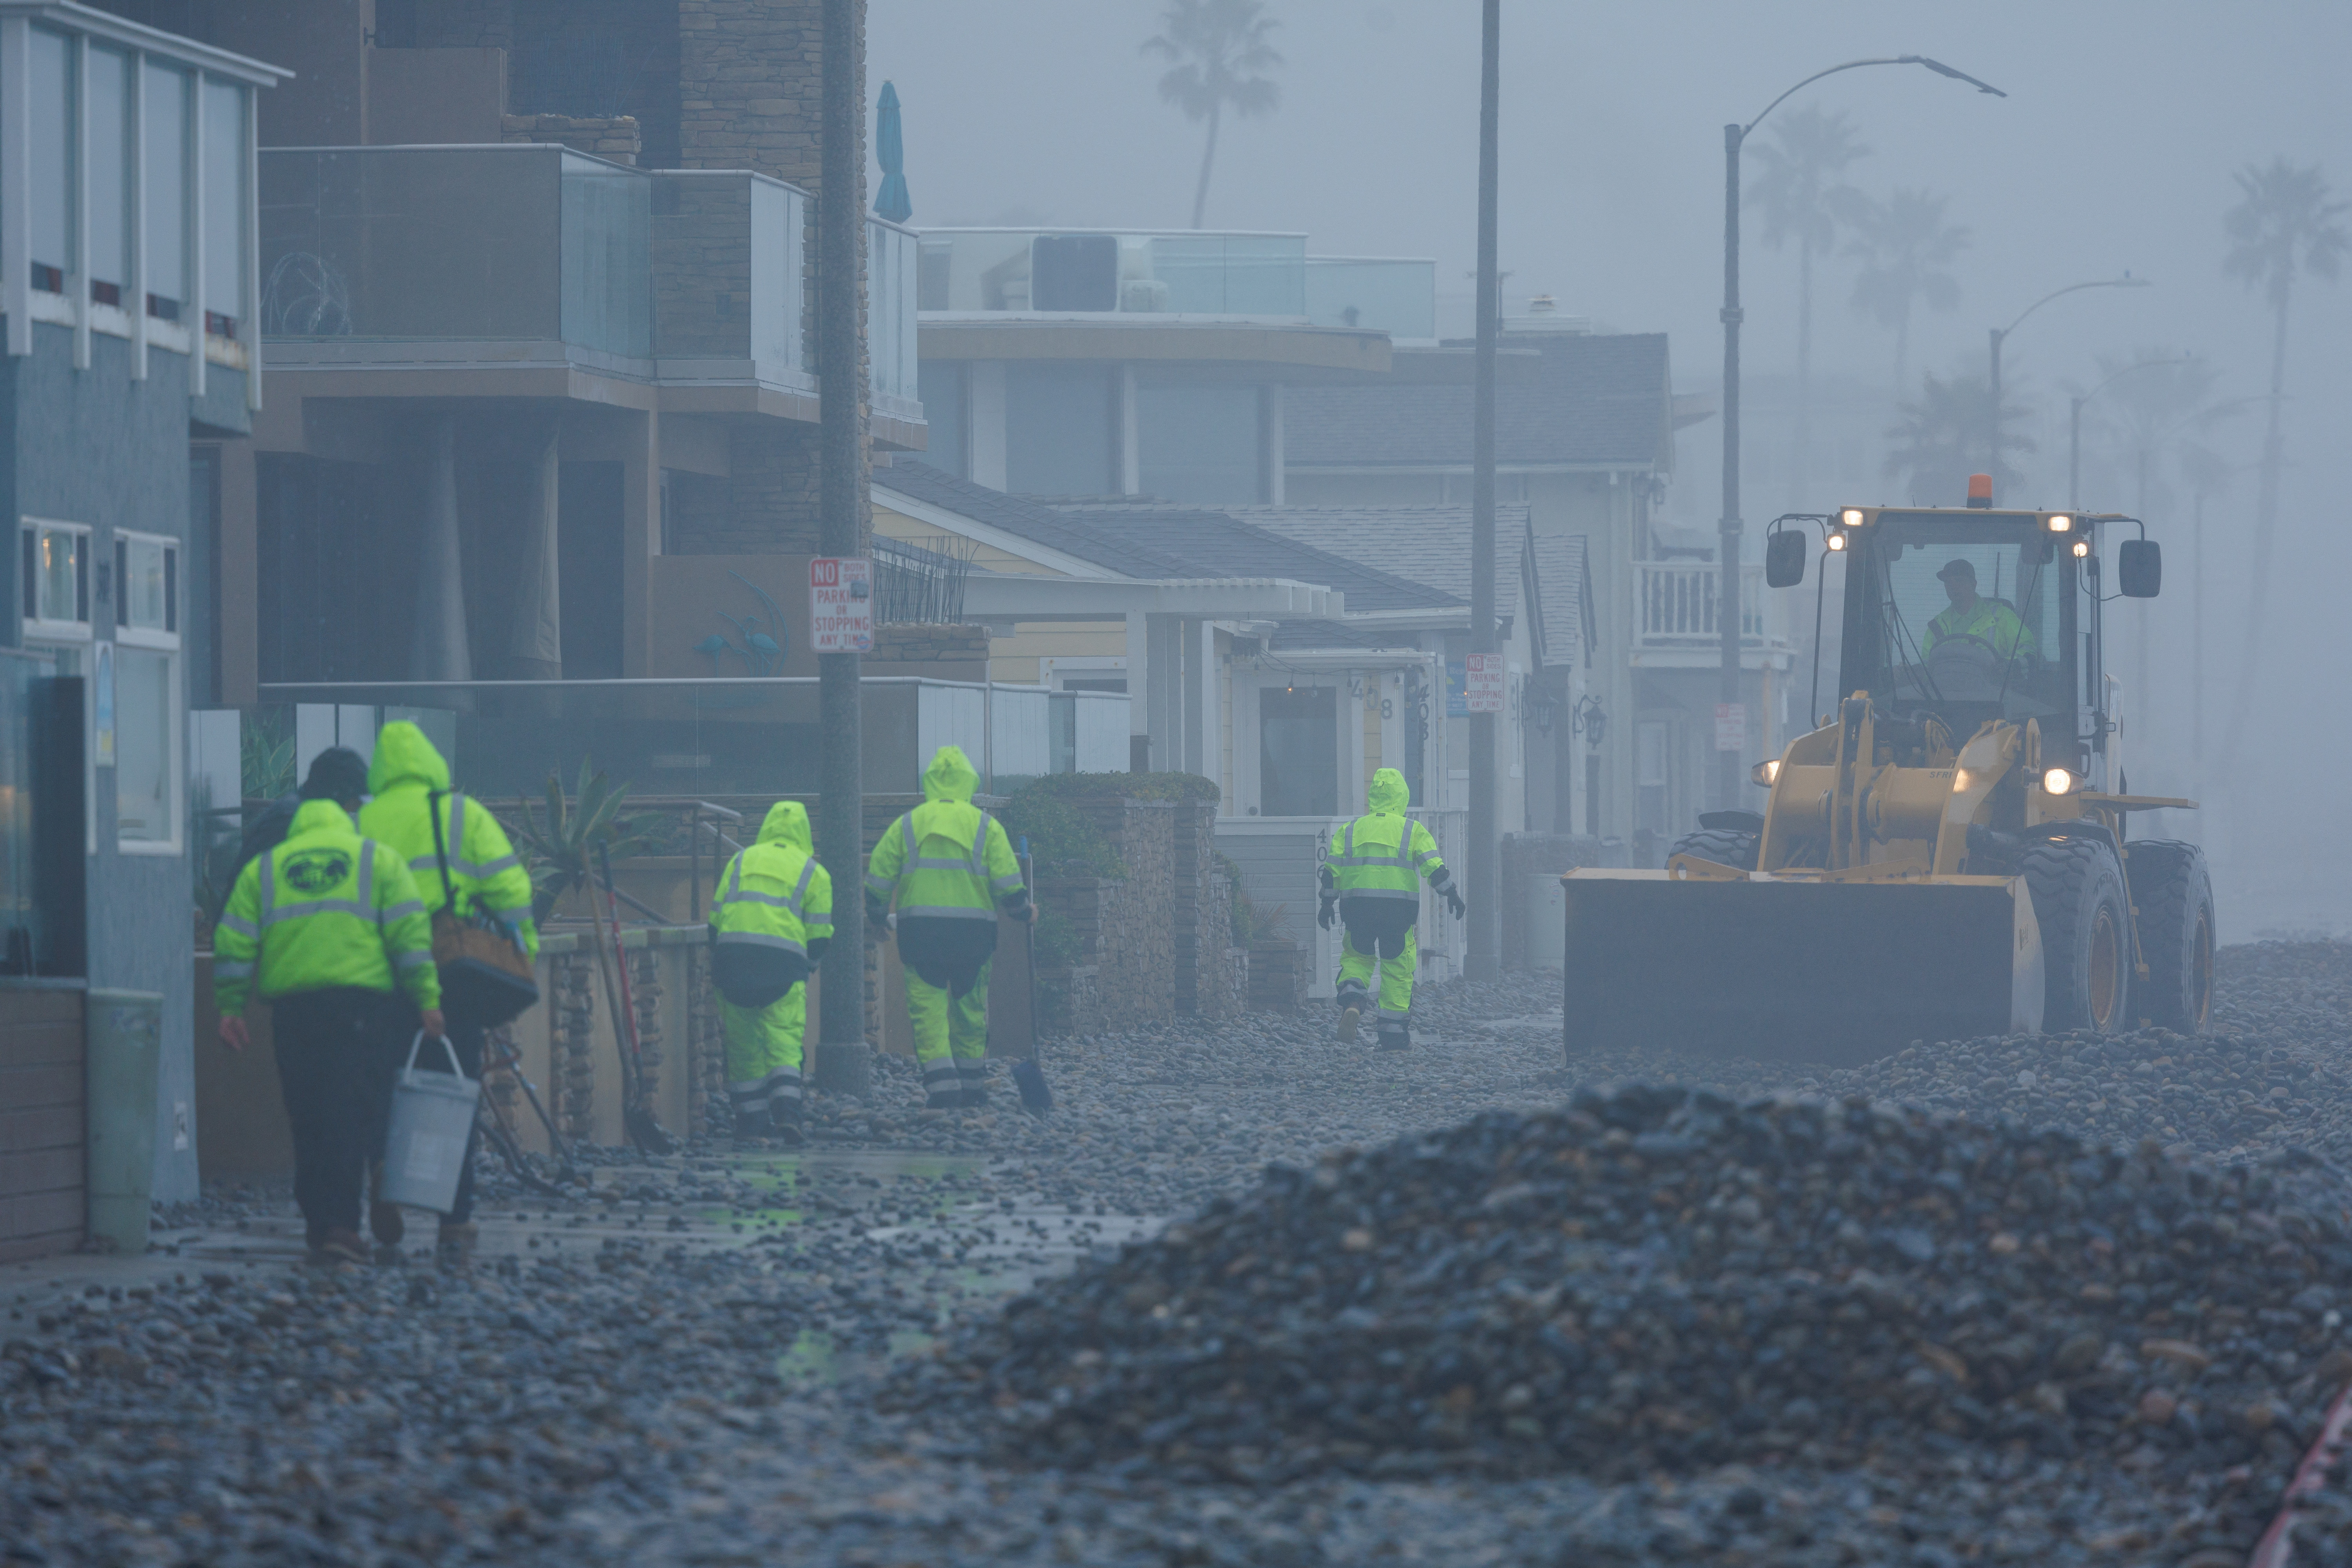 California impacted by another wet winter storm